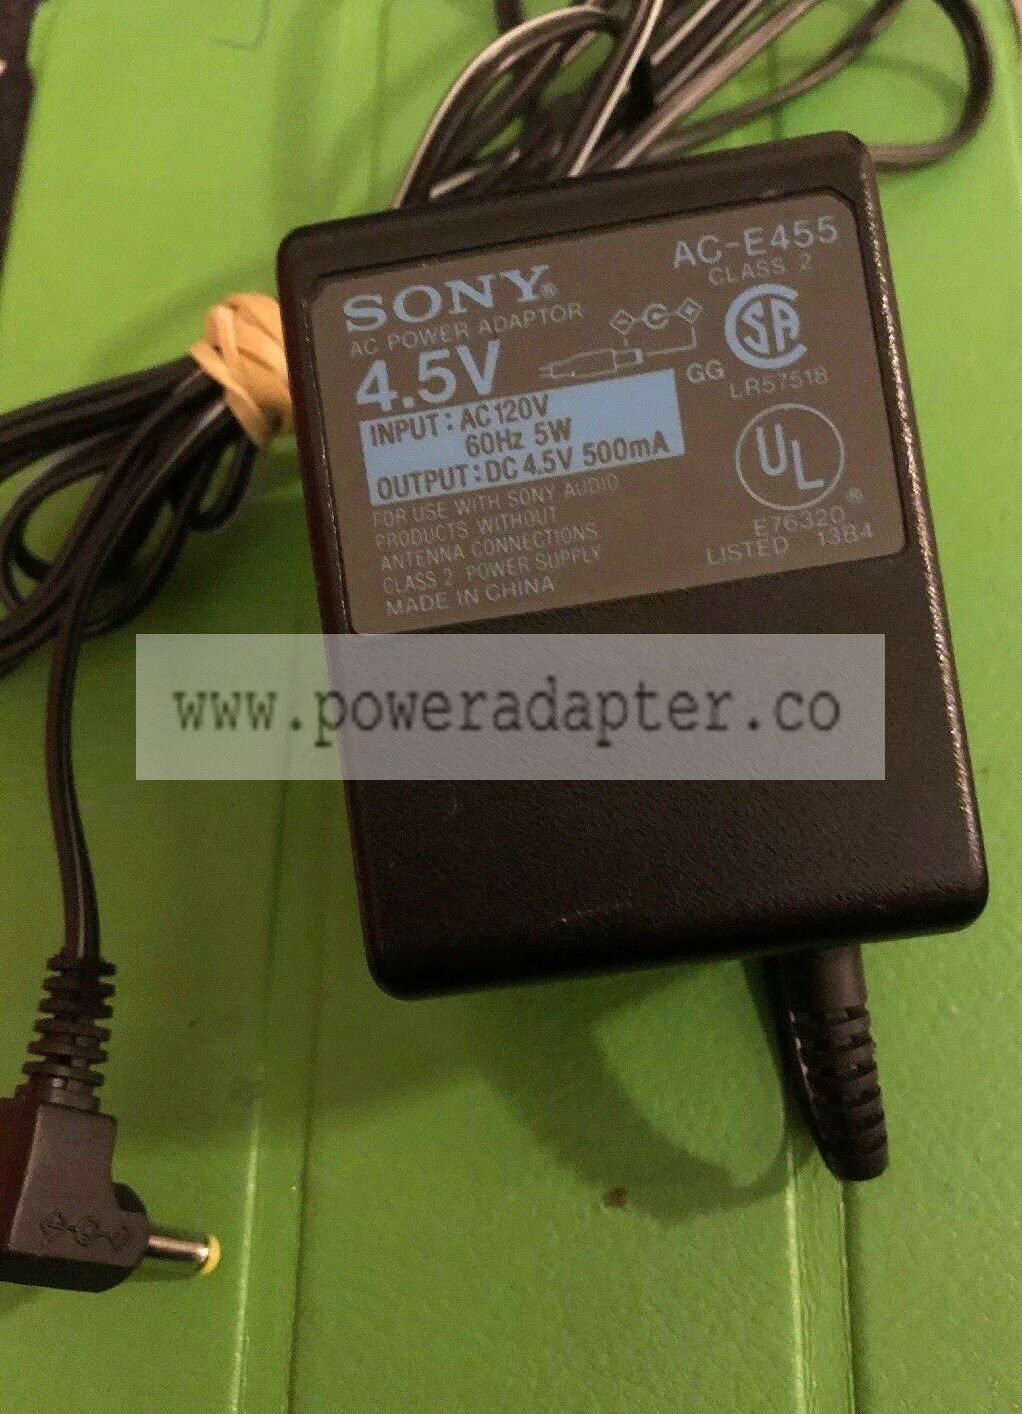 Sony Power Supply AC Adapter 4.5 Volt for CD, Diskman, MD Minidisc, MP3 AC-E455 Type: AC/AC Adapter Brand: Sony Output - Click Image to Close